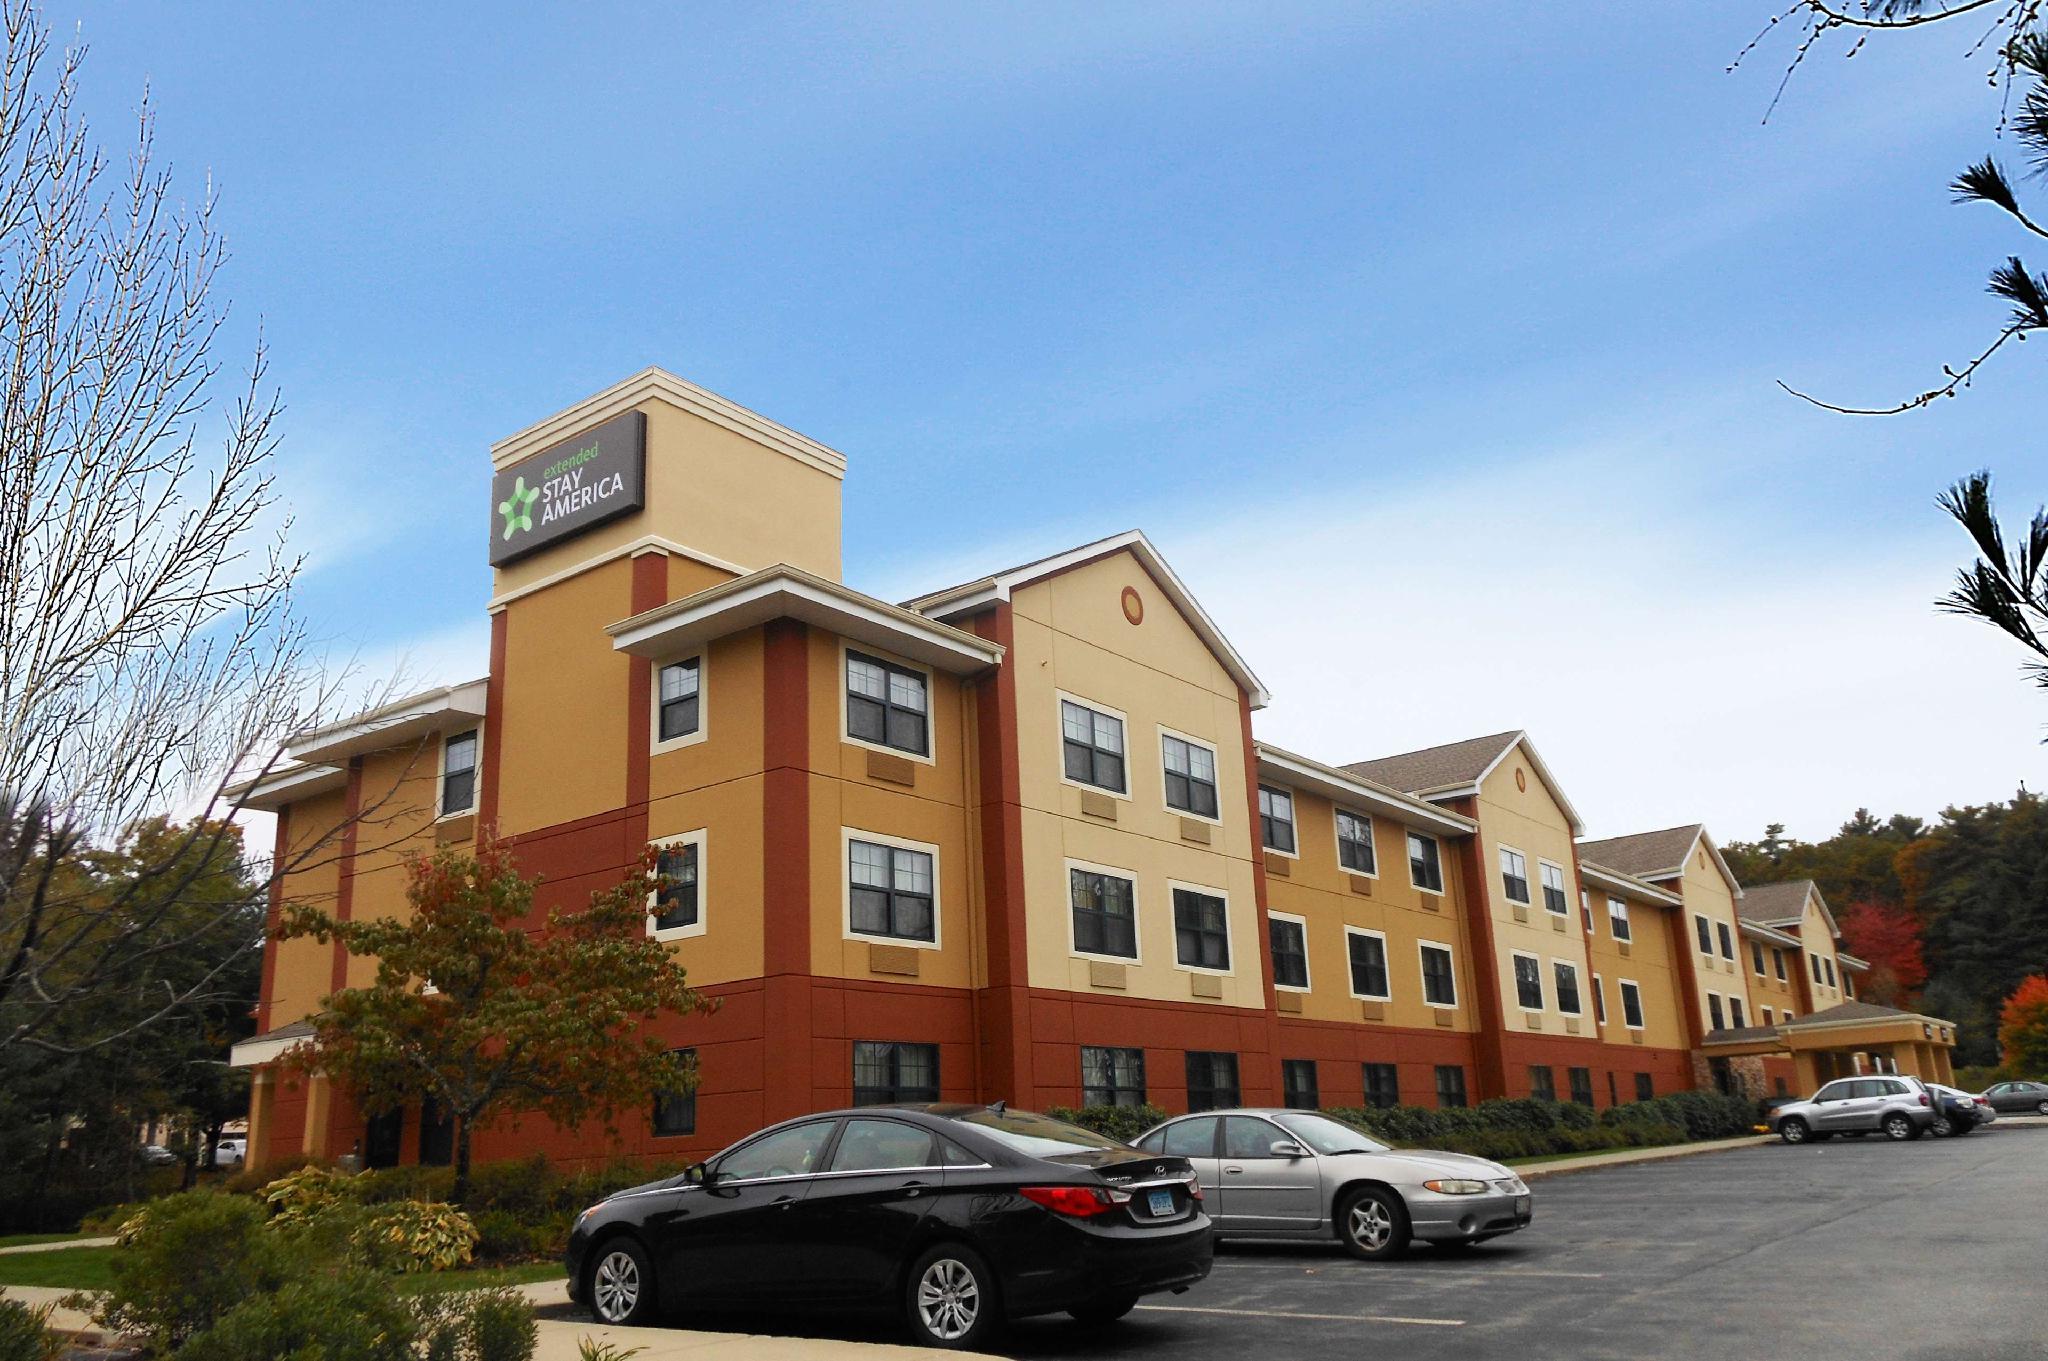 EXTENDED STAY AMERICA NASHUA MANCHESTER